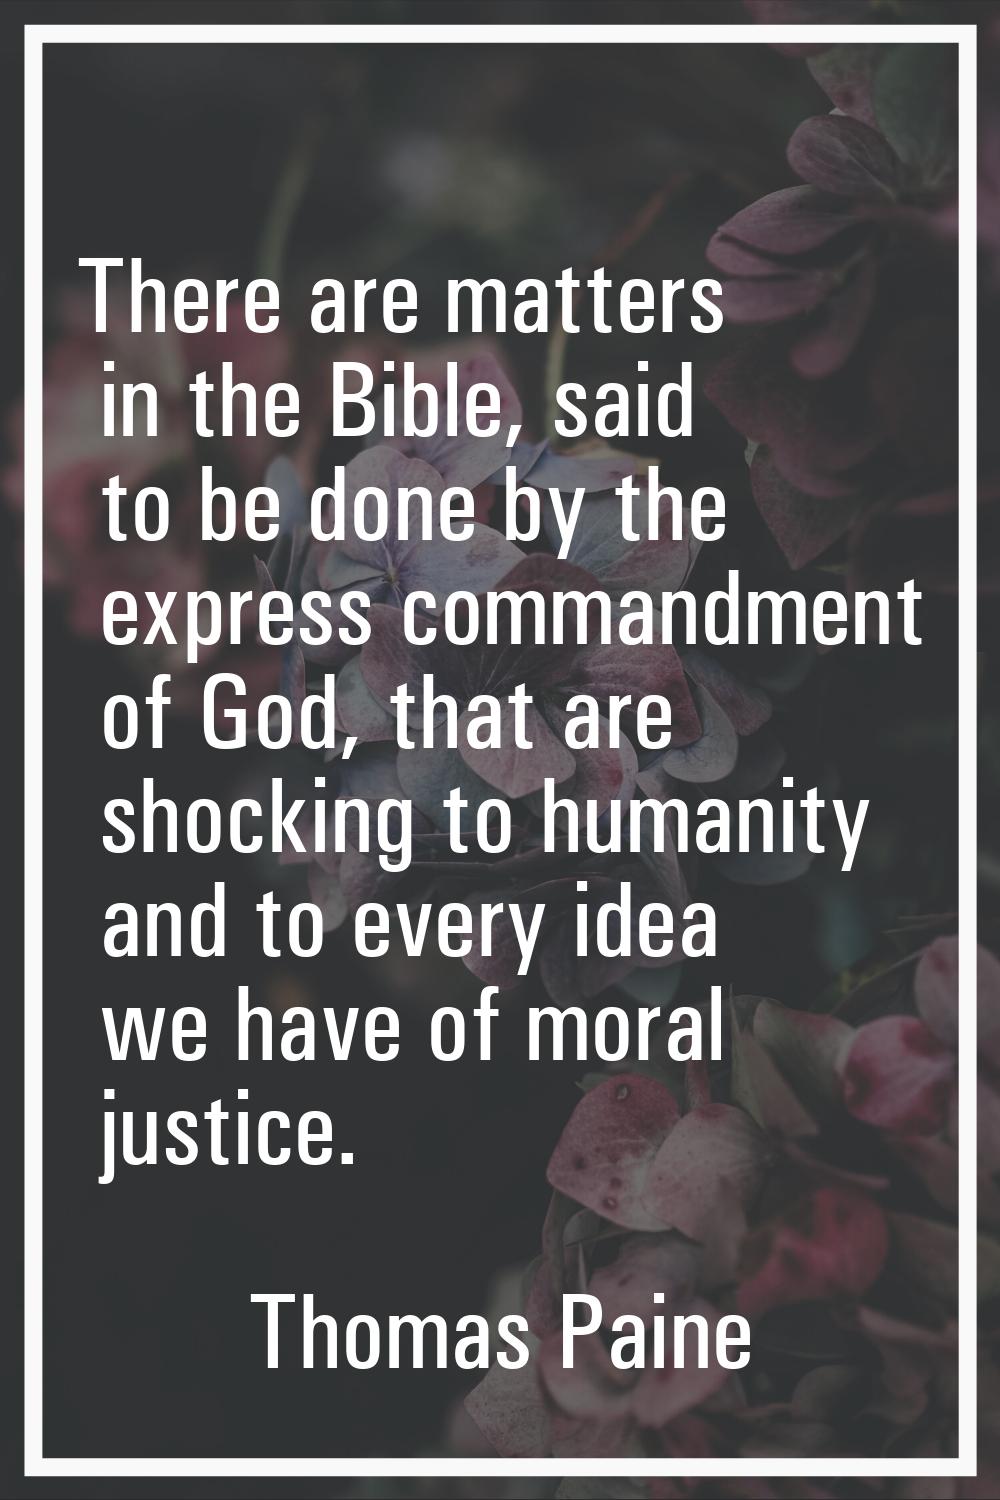 There are matters in the Bible, said to be done by the express commandment of God, that are shockin